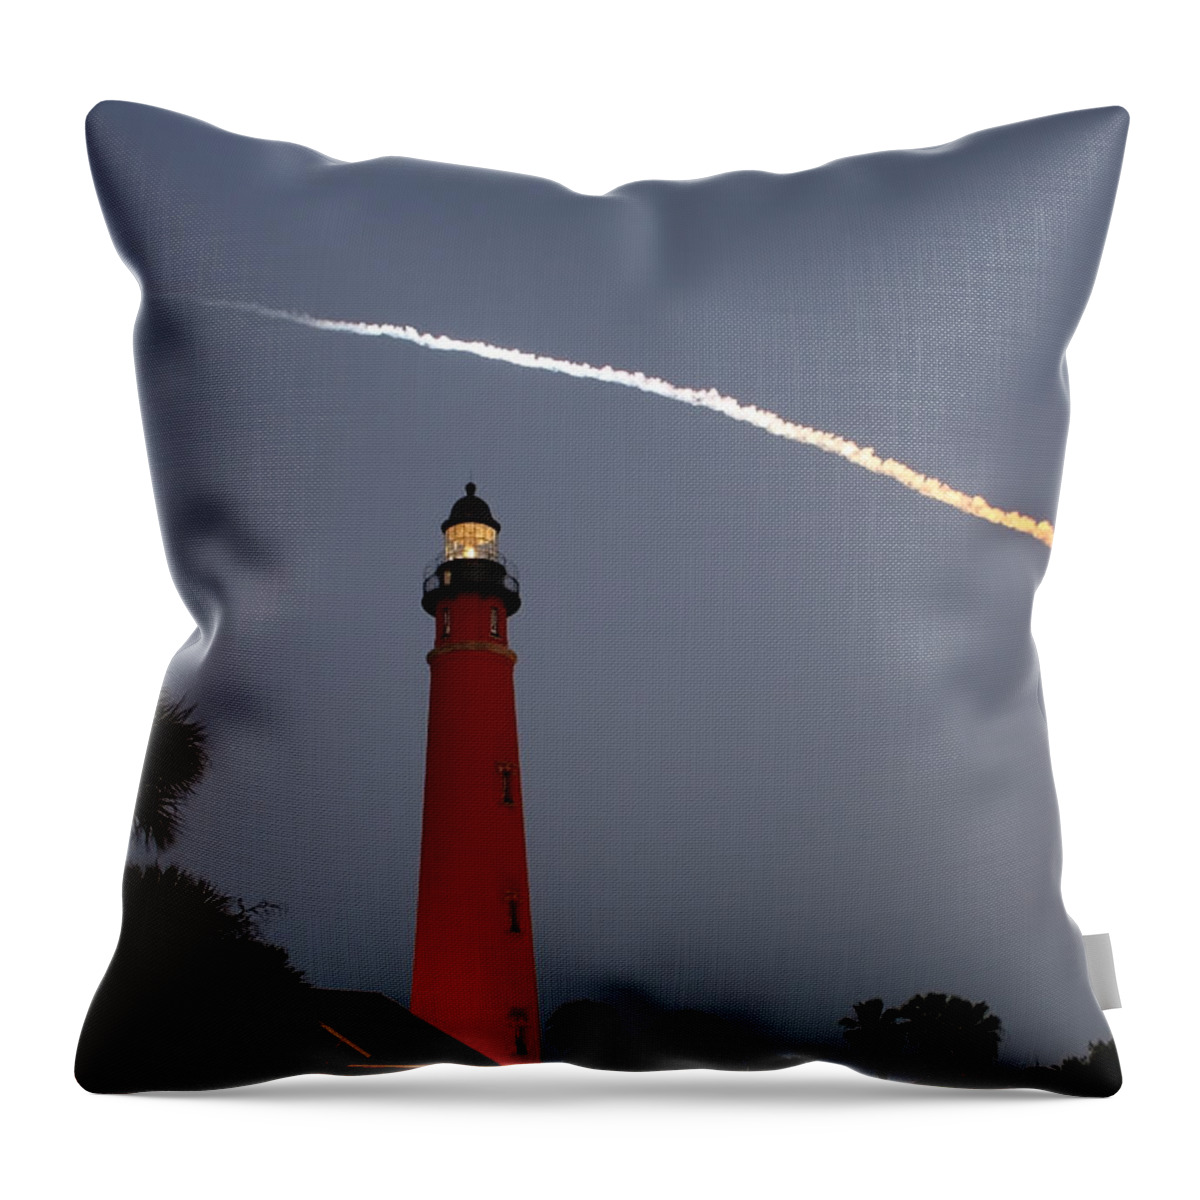 Space Throw Pillow featuring the photograph Discovery Booster Separation over Ponce Inlet Lighthouse by Paul Rebmann